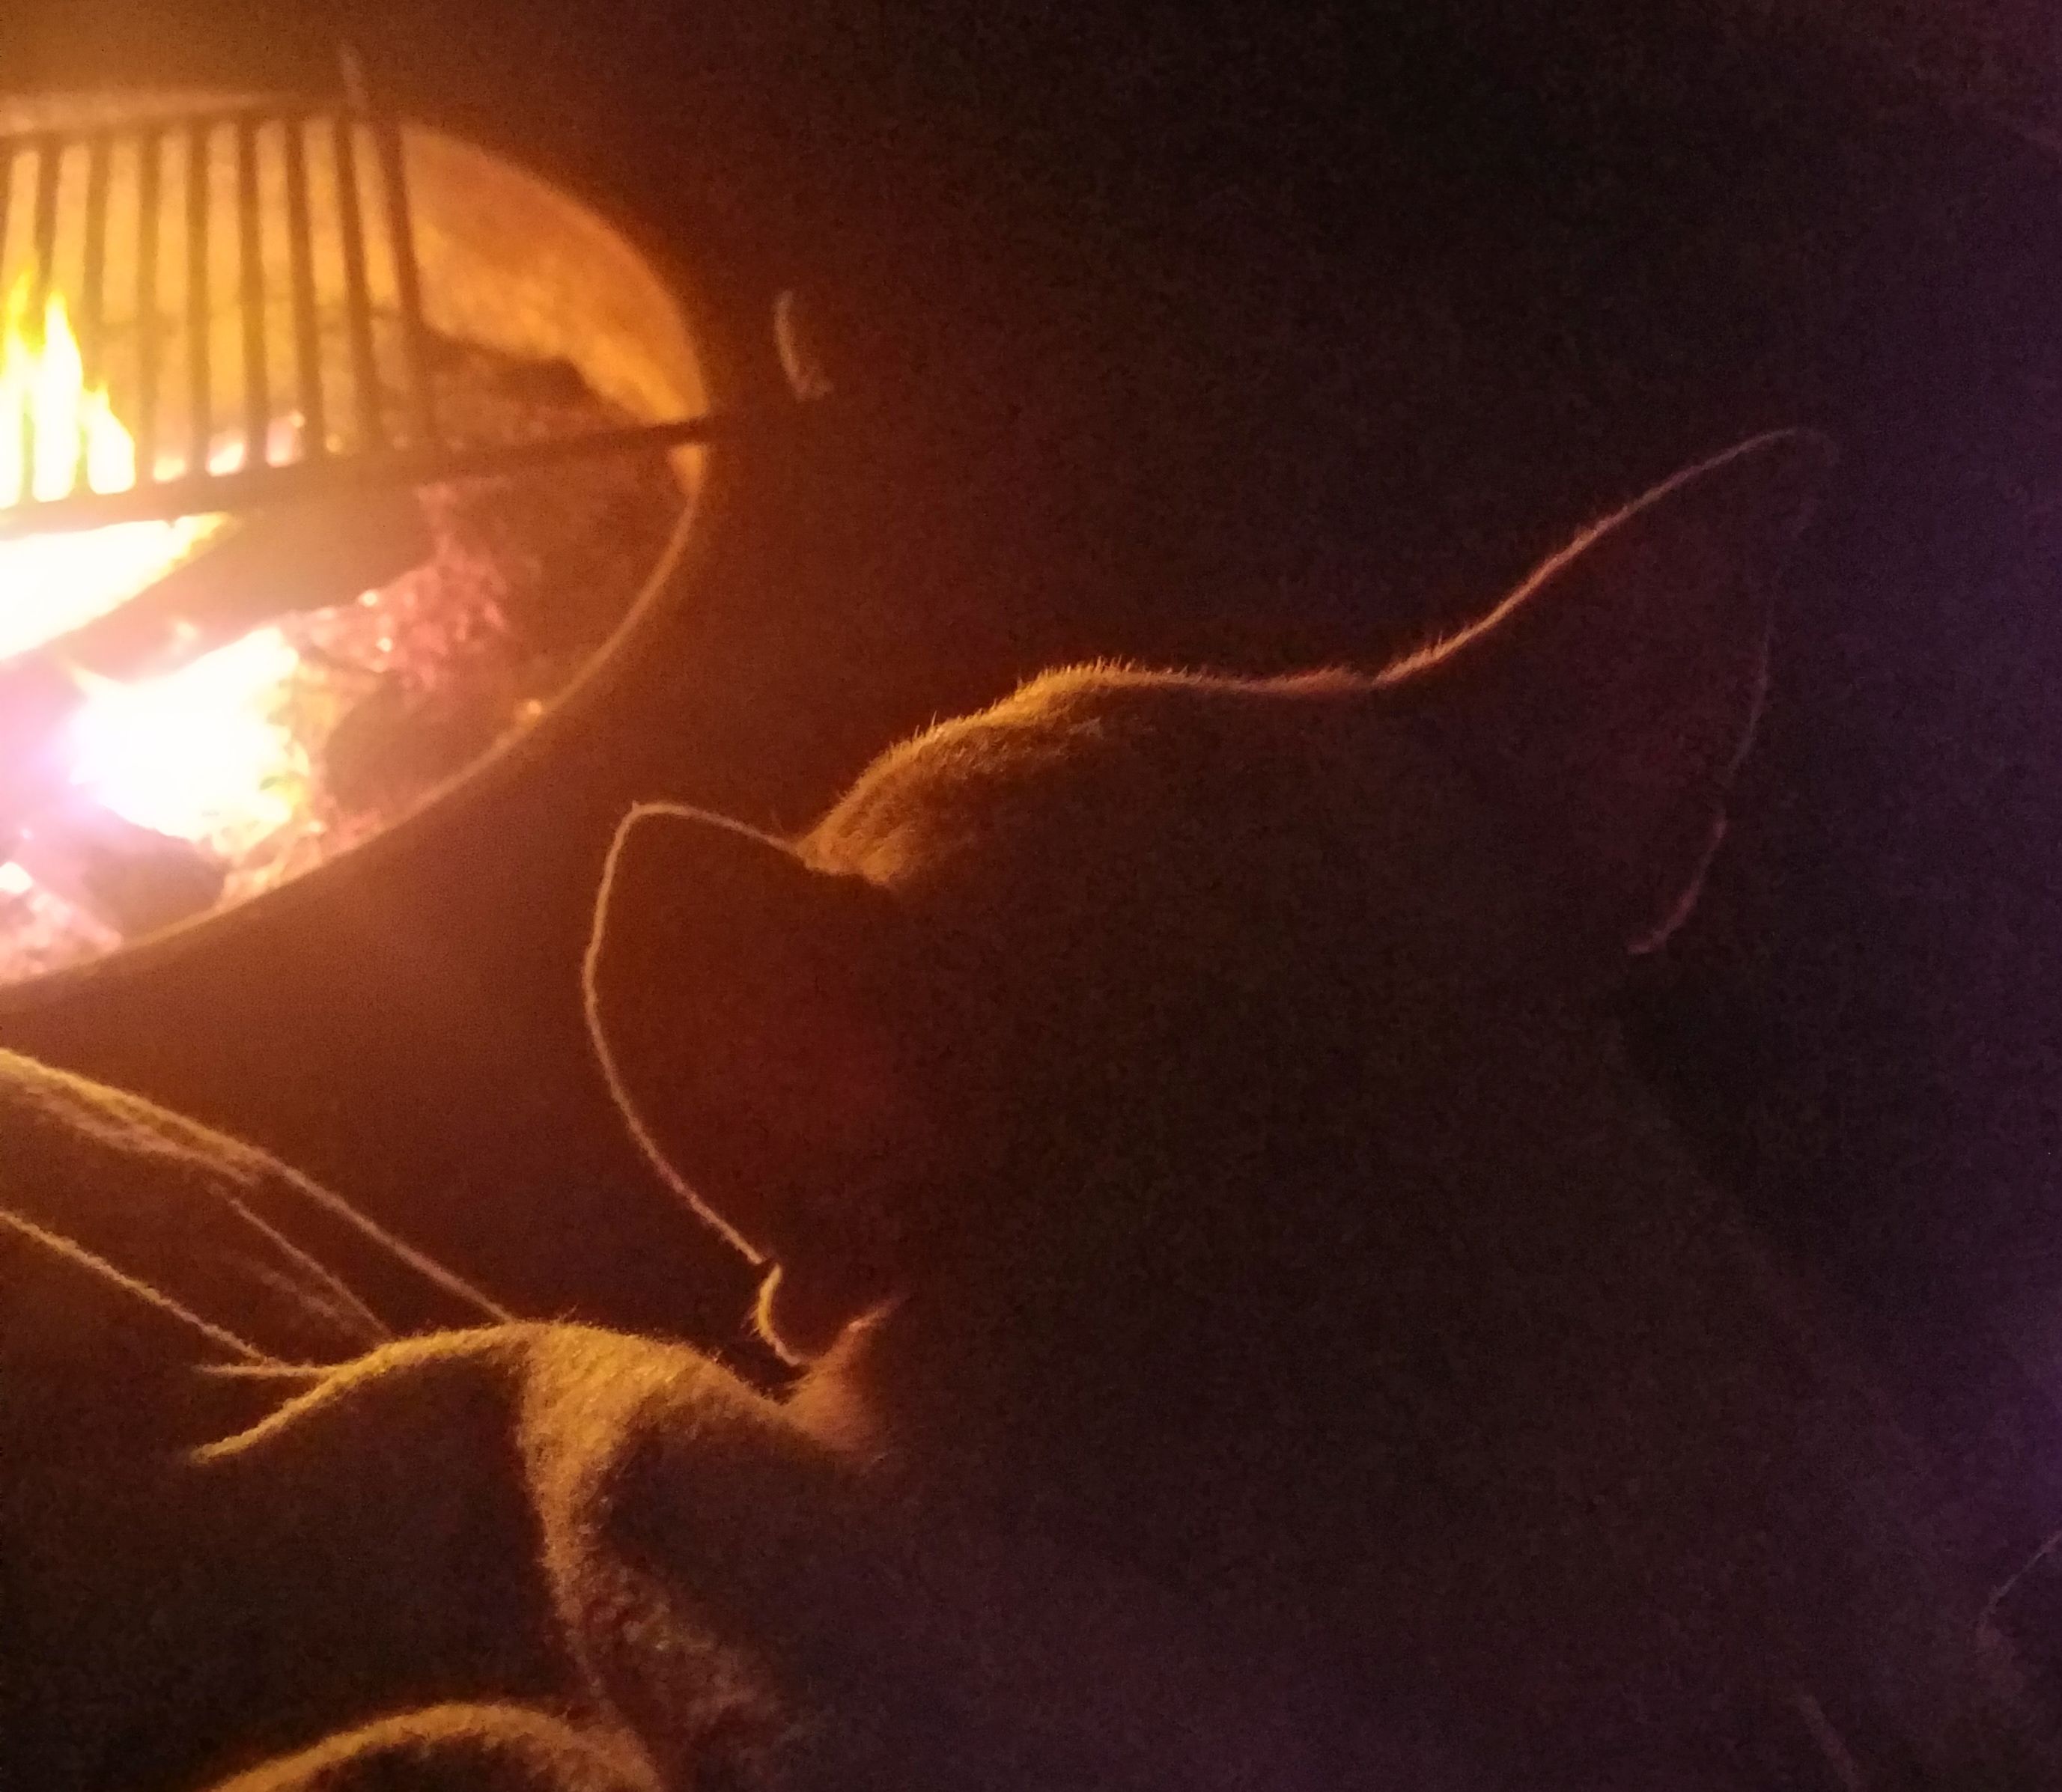 Peanut snuggling with mama by the campfire